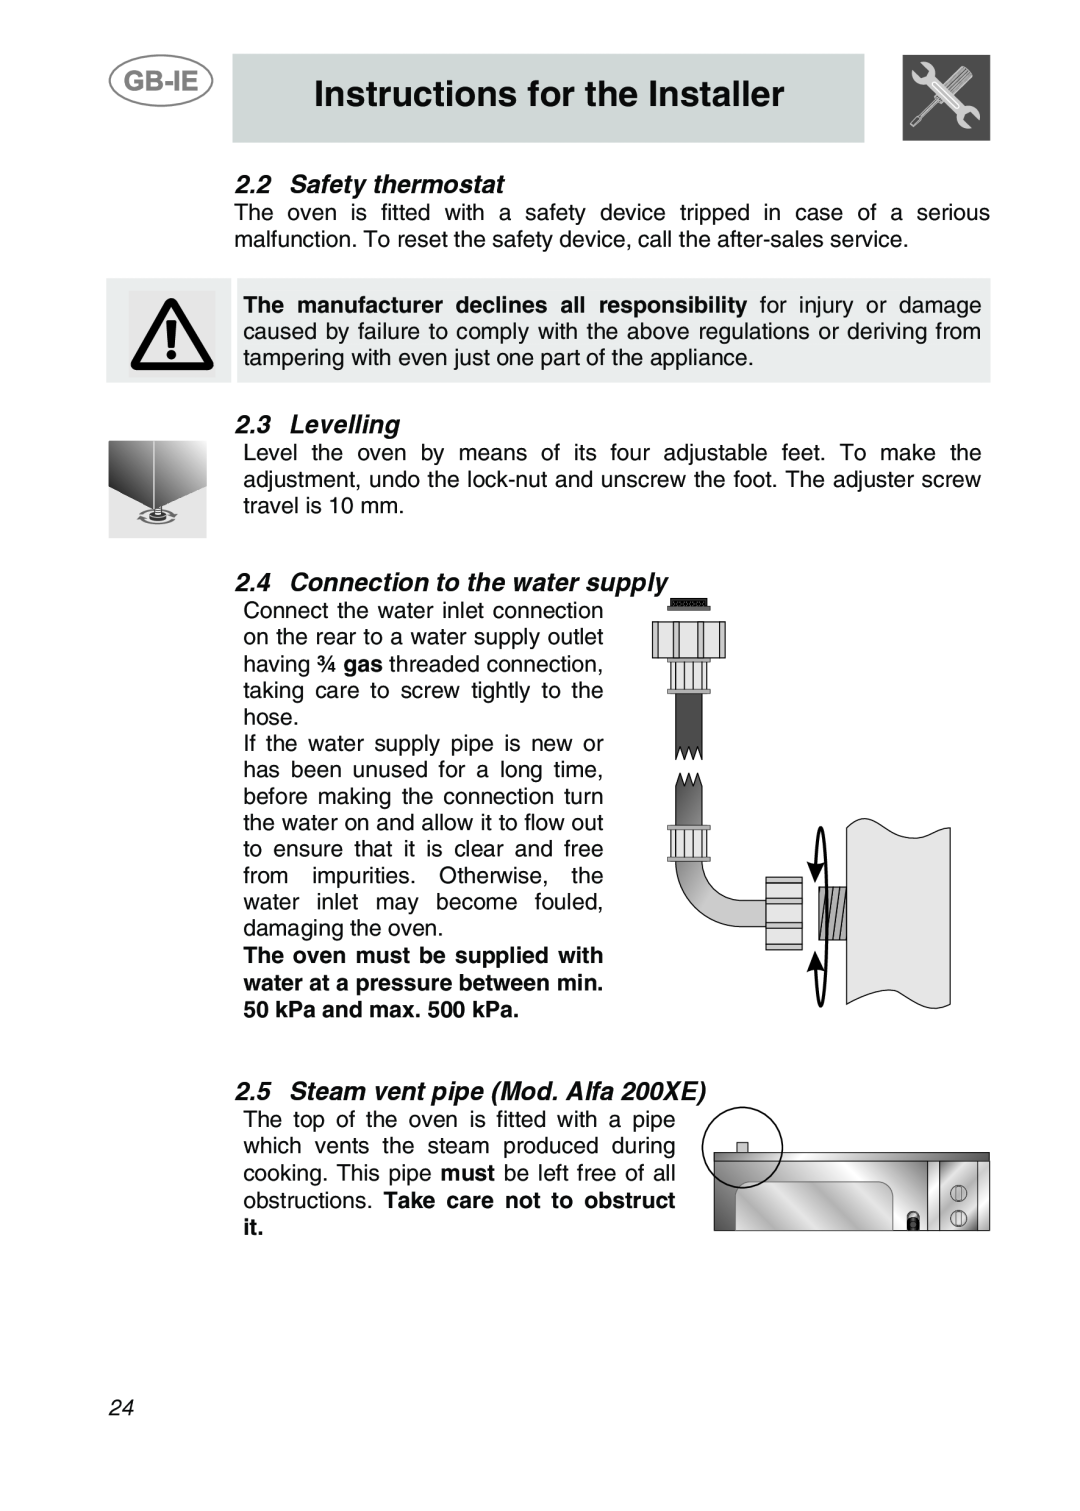 Smeg ALFA201XE manual Safety thermostat, Levelling, Connection to the water supply, Steam vent pipe Mod. Alfa 200XE 